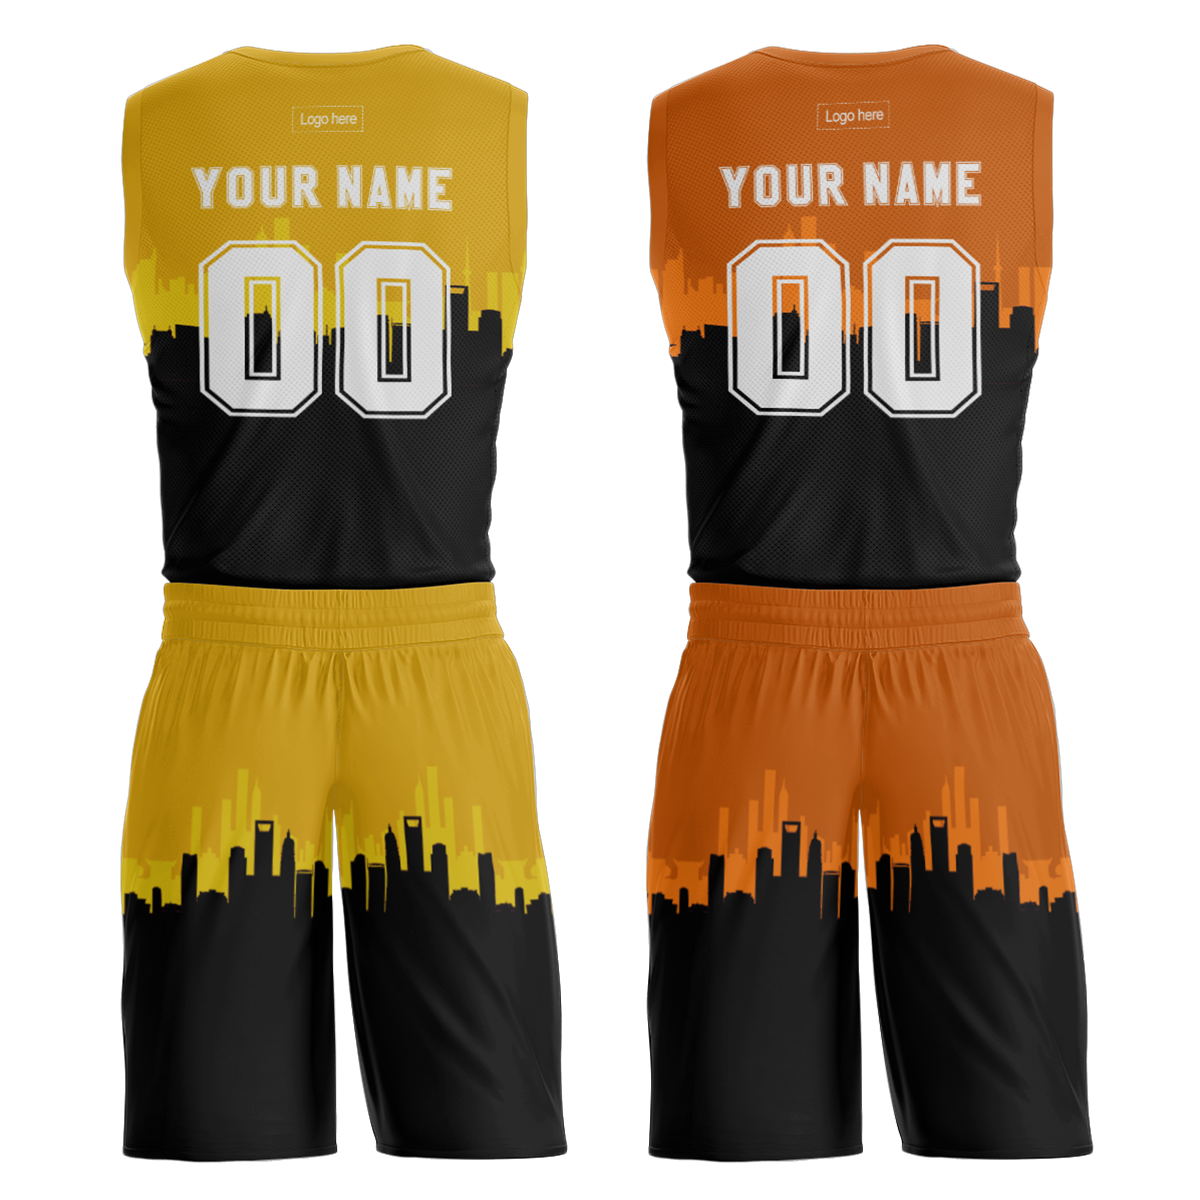 Custom Basketball Jerseys Uniforms Print Team Name Number Youth Jersey Set Shirt Shorts University Game Sports Suit Clothes